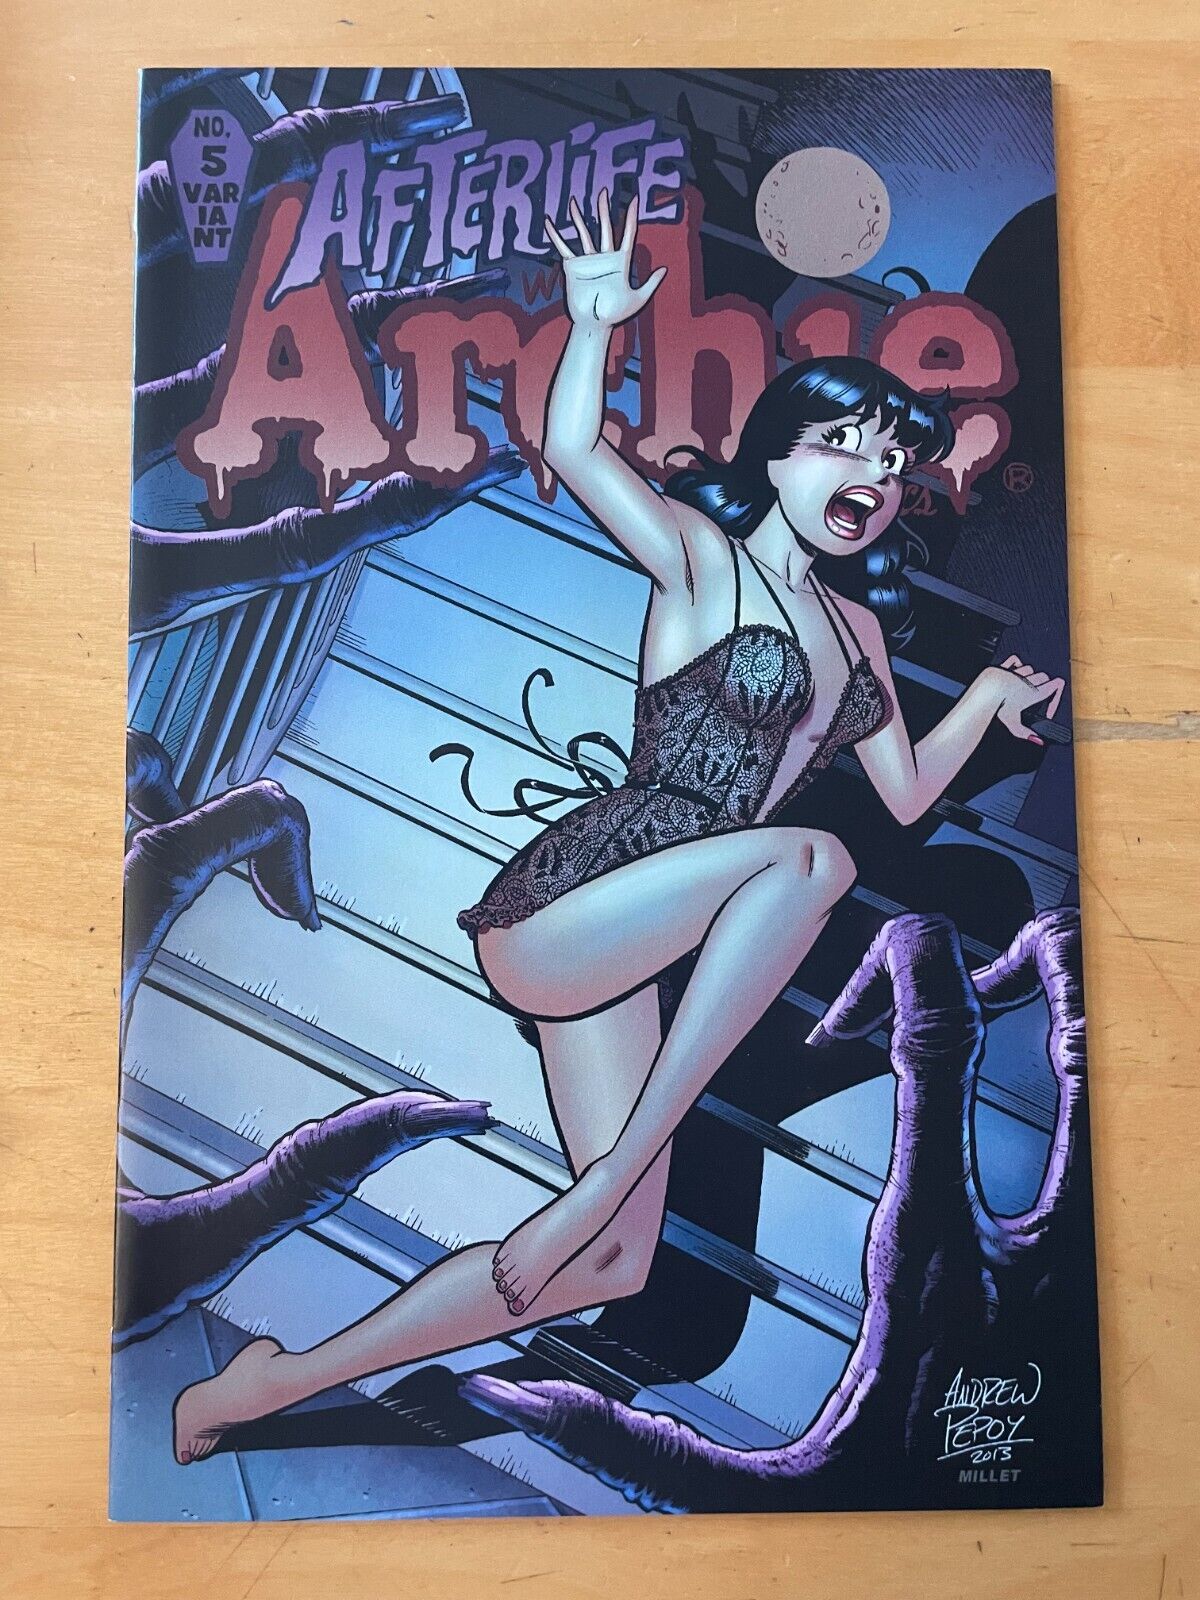 AFTERLIFE WITH ARCHIE #5 Pepoy and Francavilla Cover Avg Grade (9.4 - 9.6)